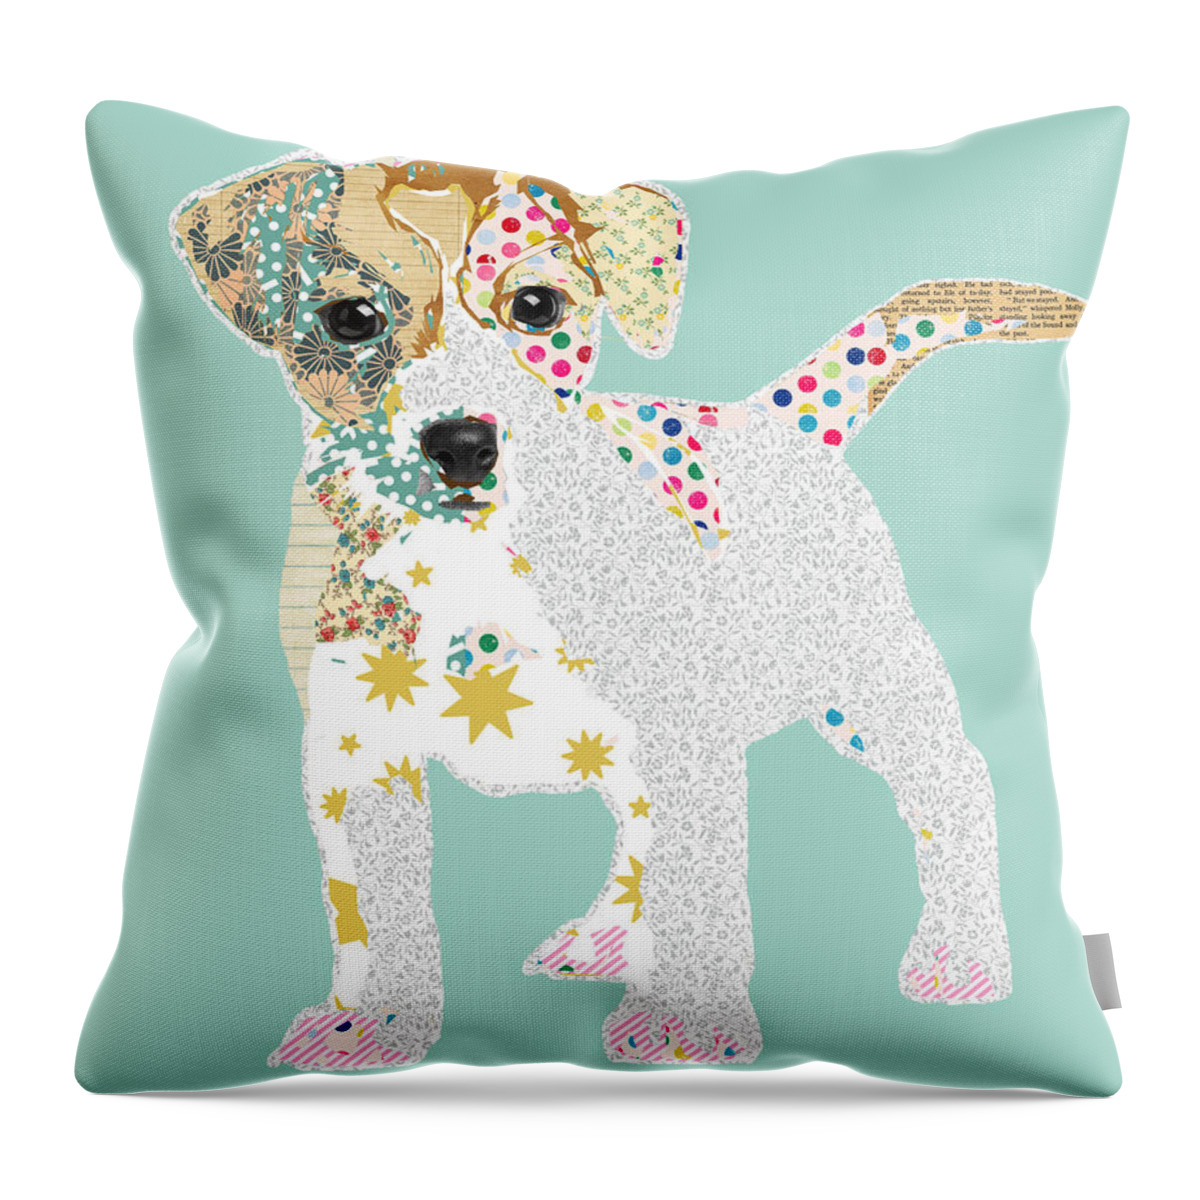 Jack Russel Collage Throw Pillow featuring the mixed media Jack Russell by Claudia Schoen